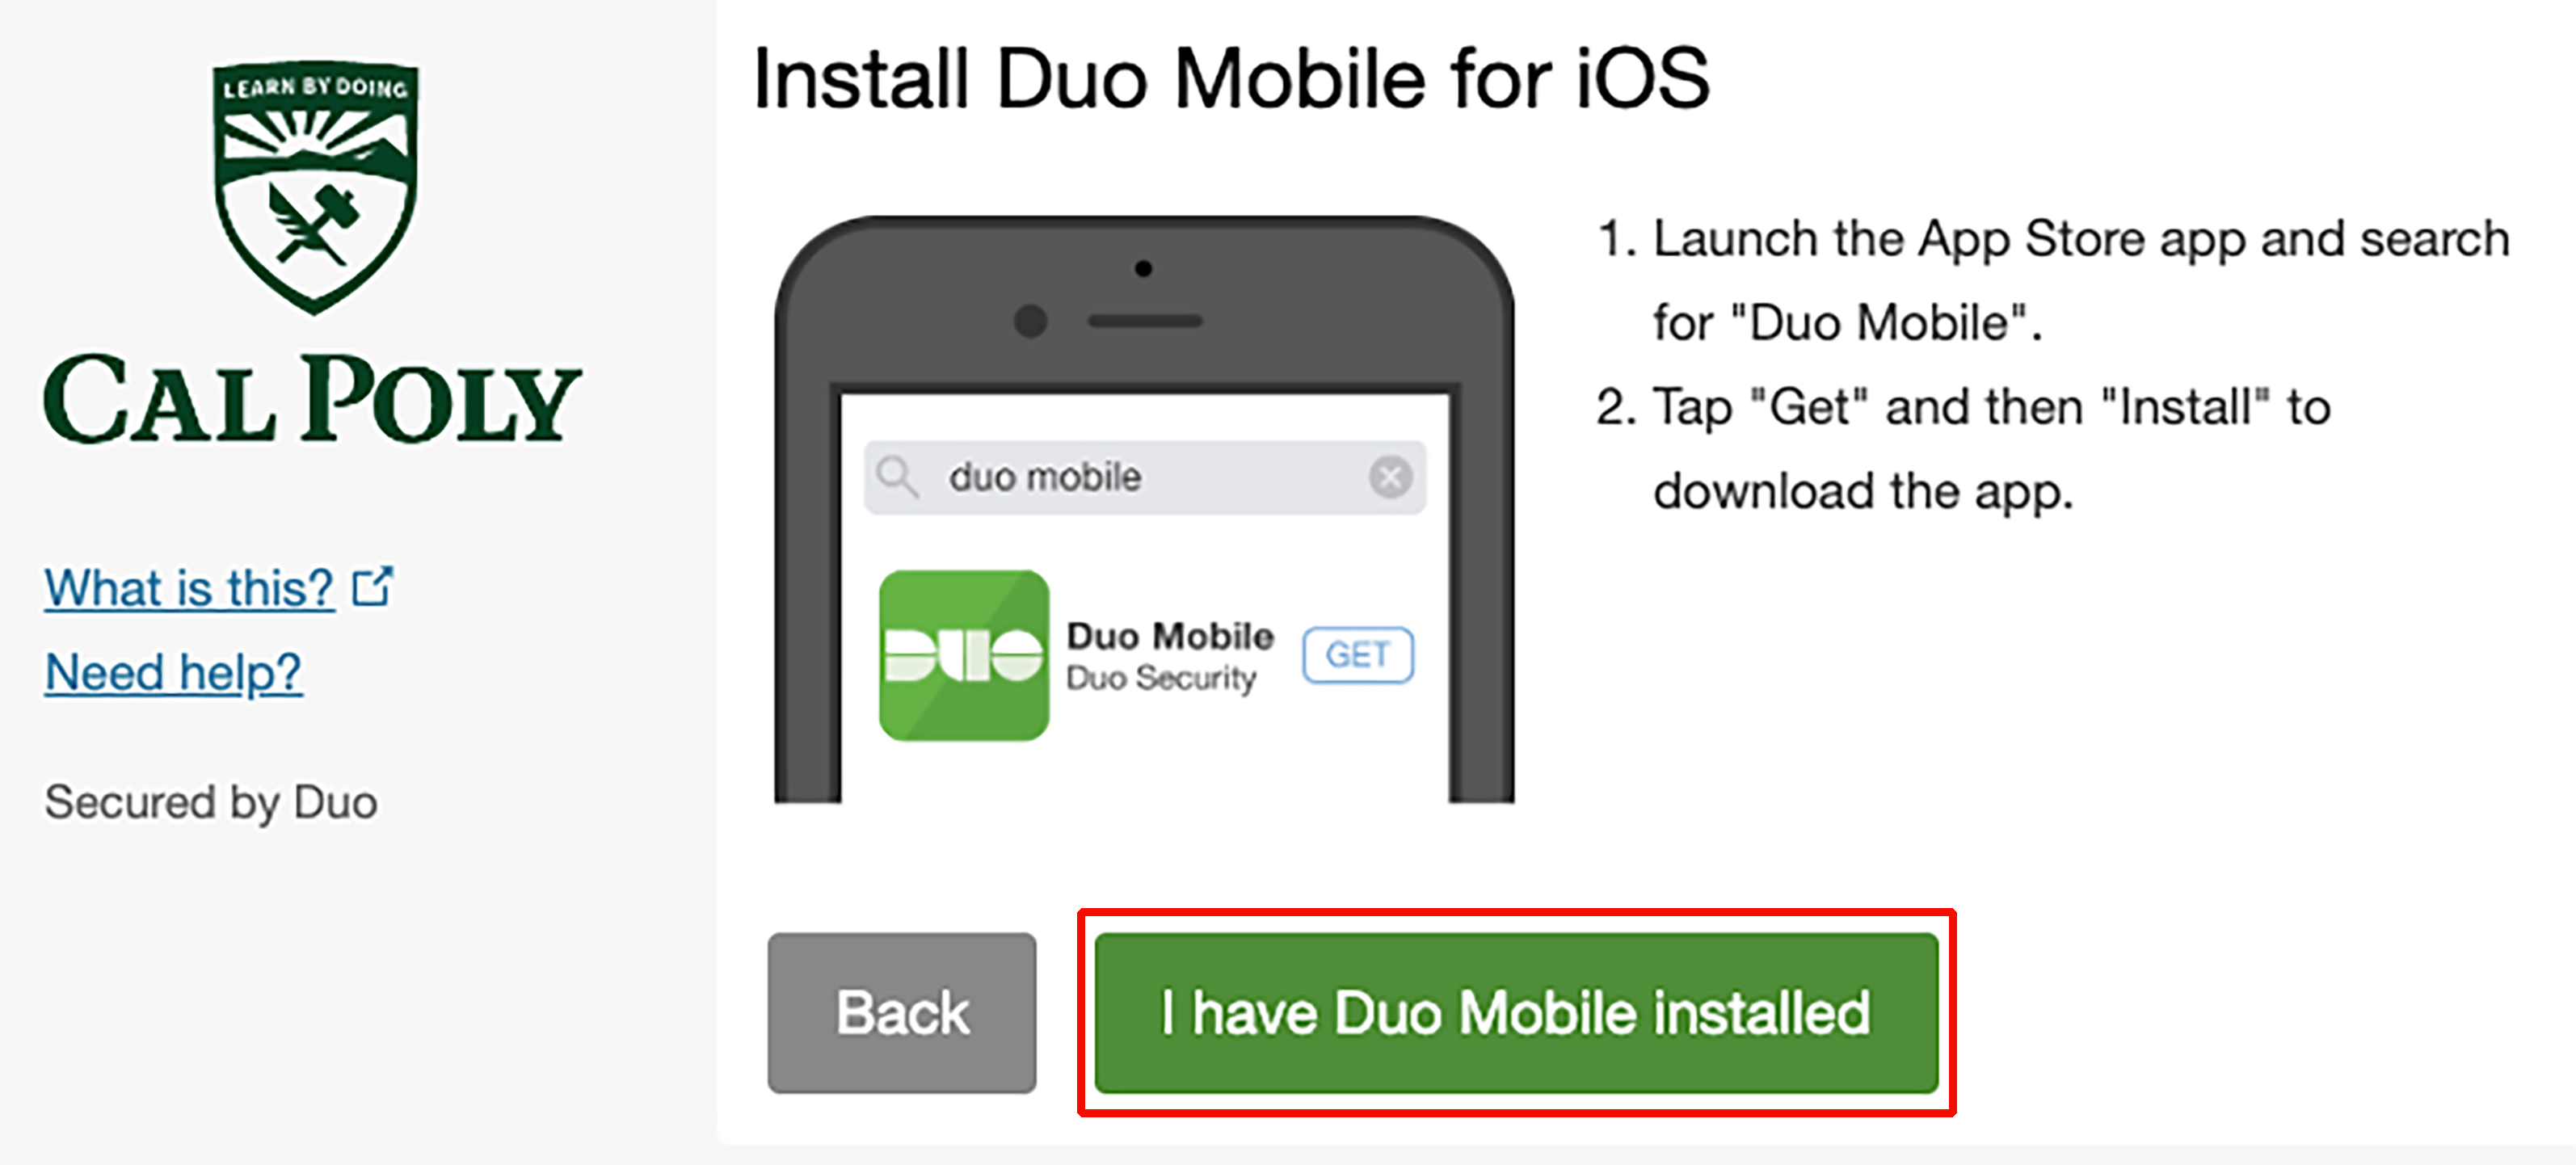 I have Duo Mobile installed button highlighted.